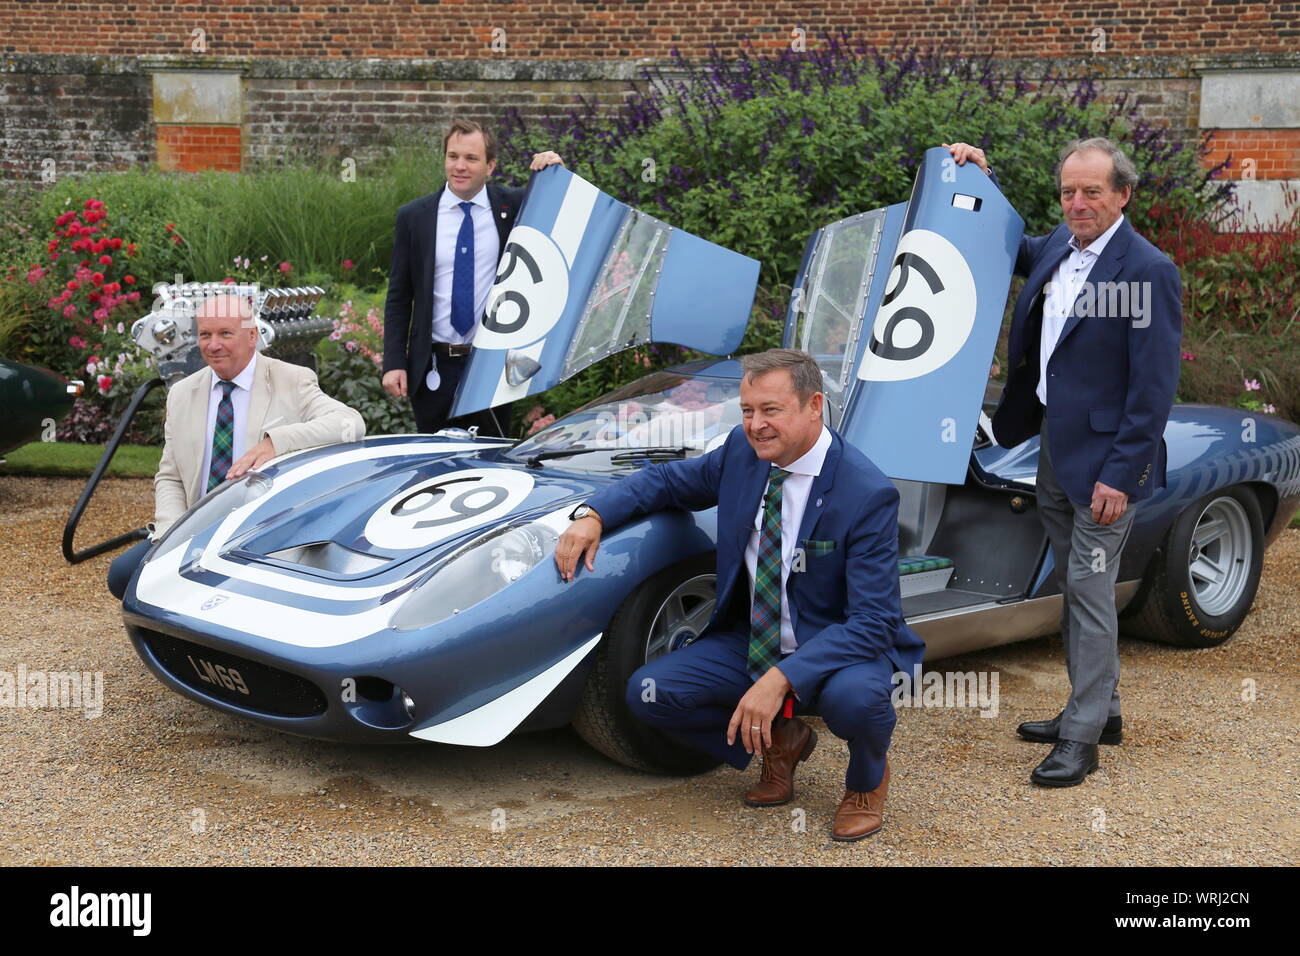 Launch of Ecurie Ecosse LM69 prototype, Concours of Elegance 2019, Hampton Court Palace, East Molesey, Surrey, England, UK, Europe Stock Photo